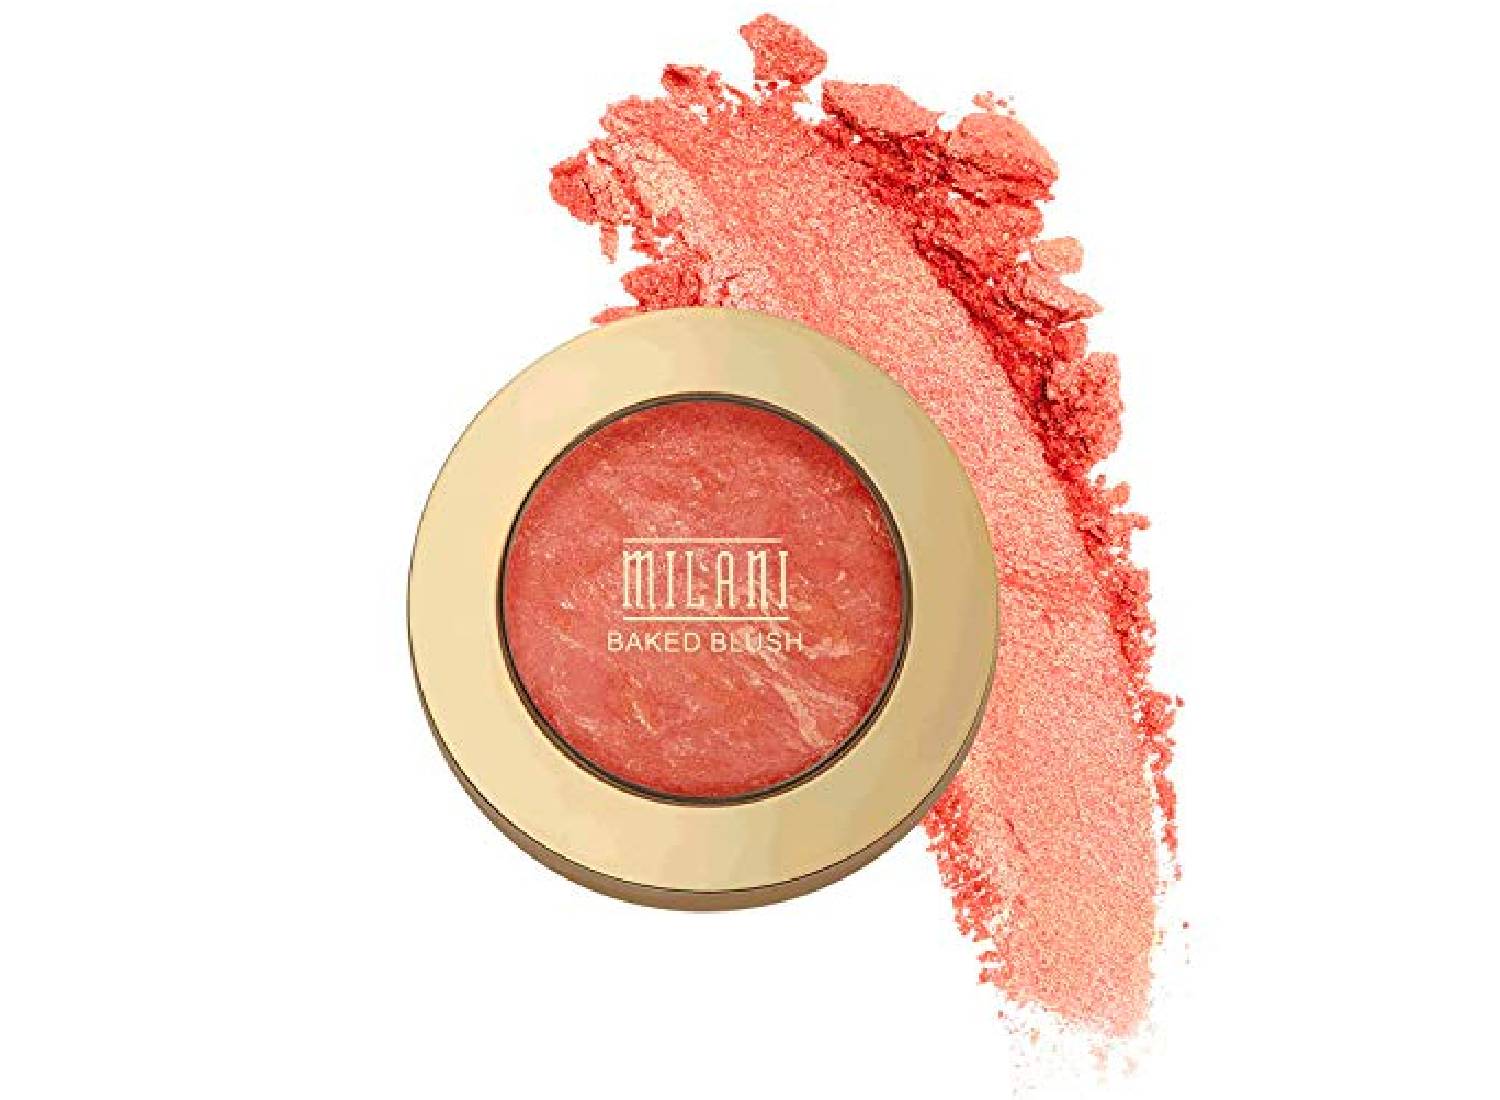 Milani Baked Blush in the peachy pink shade "Corallina"